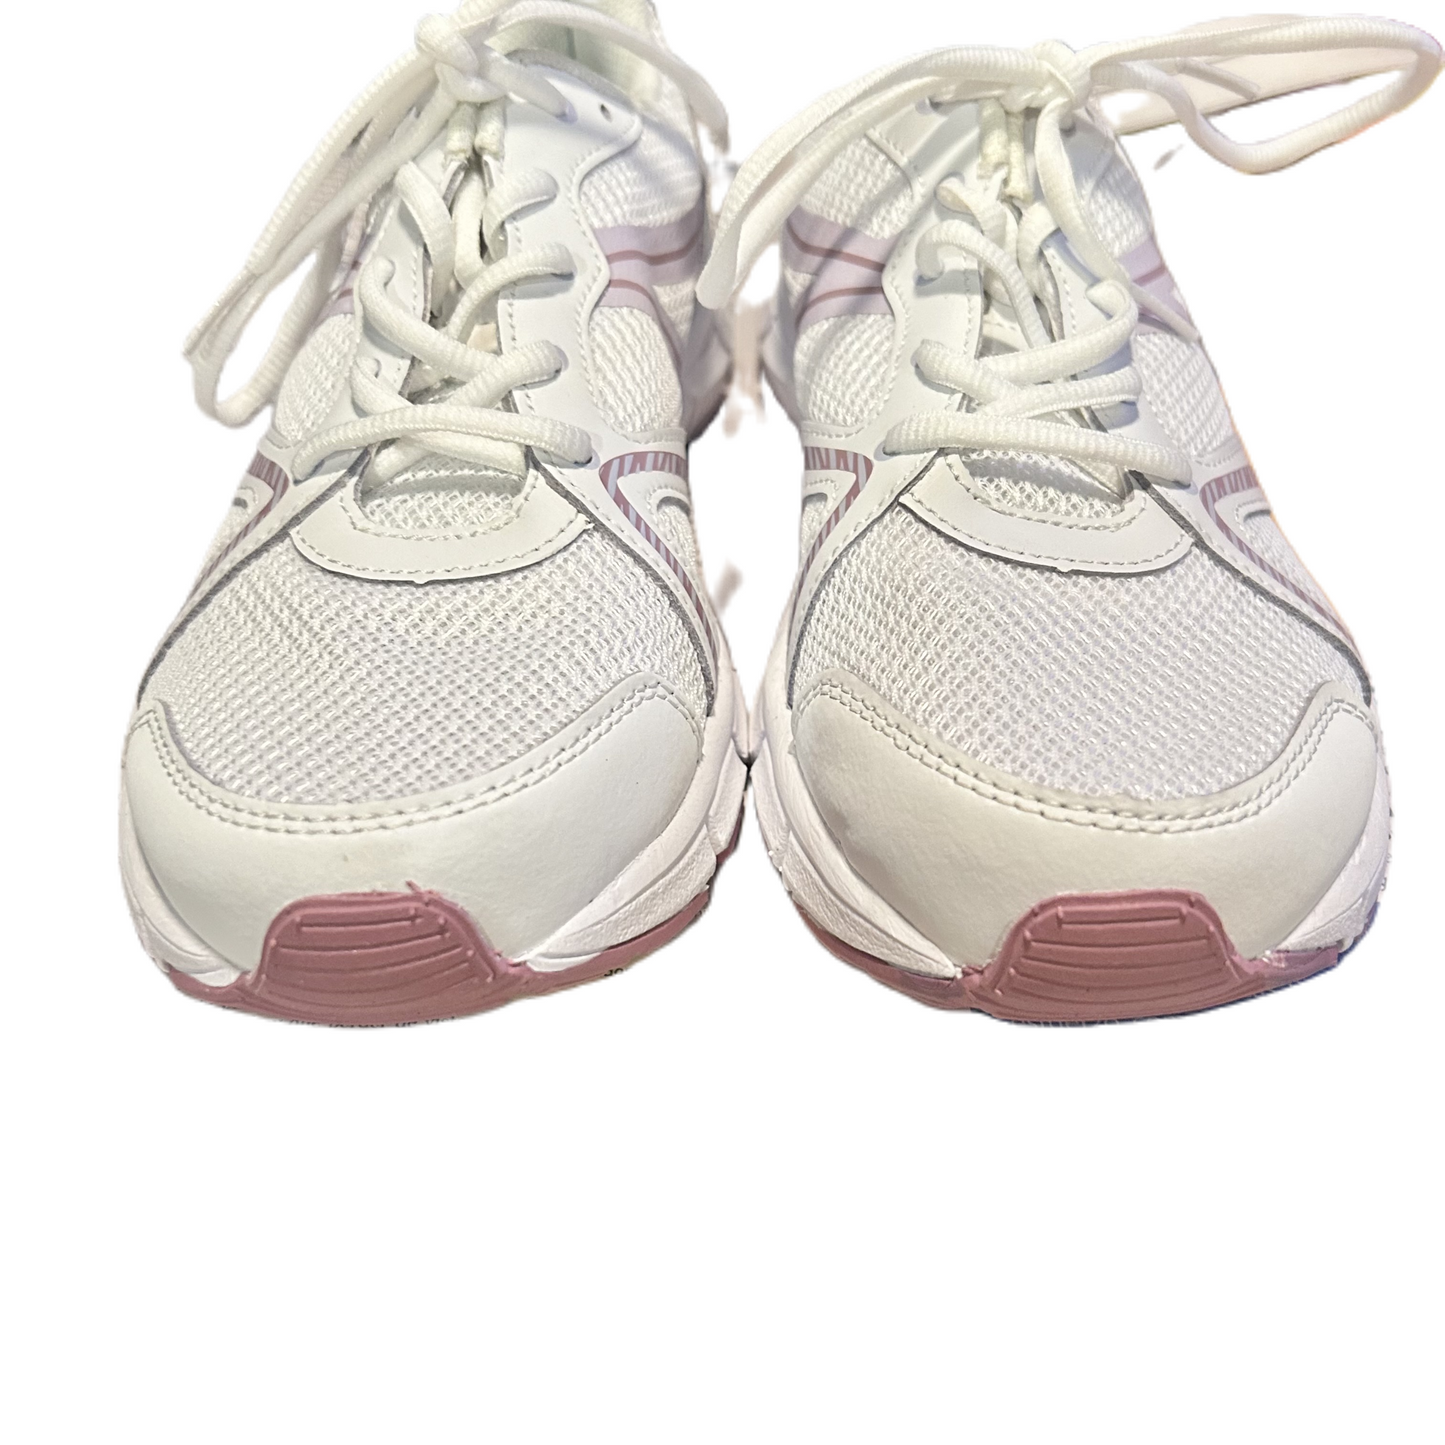 White Shoes Athletic By Ryka, Size: 11